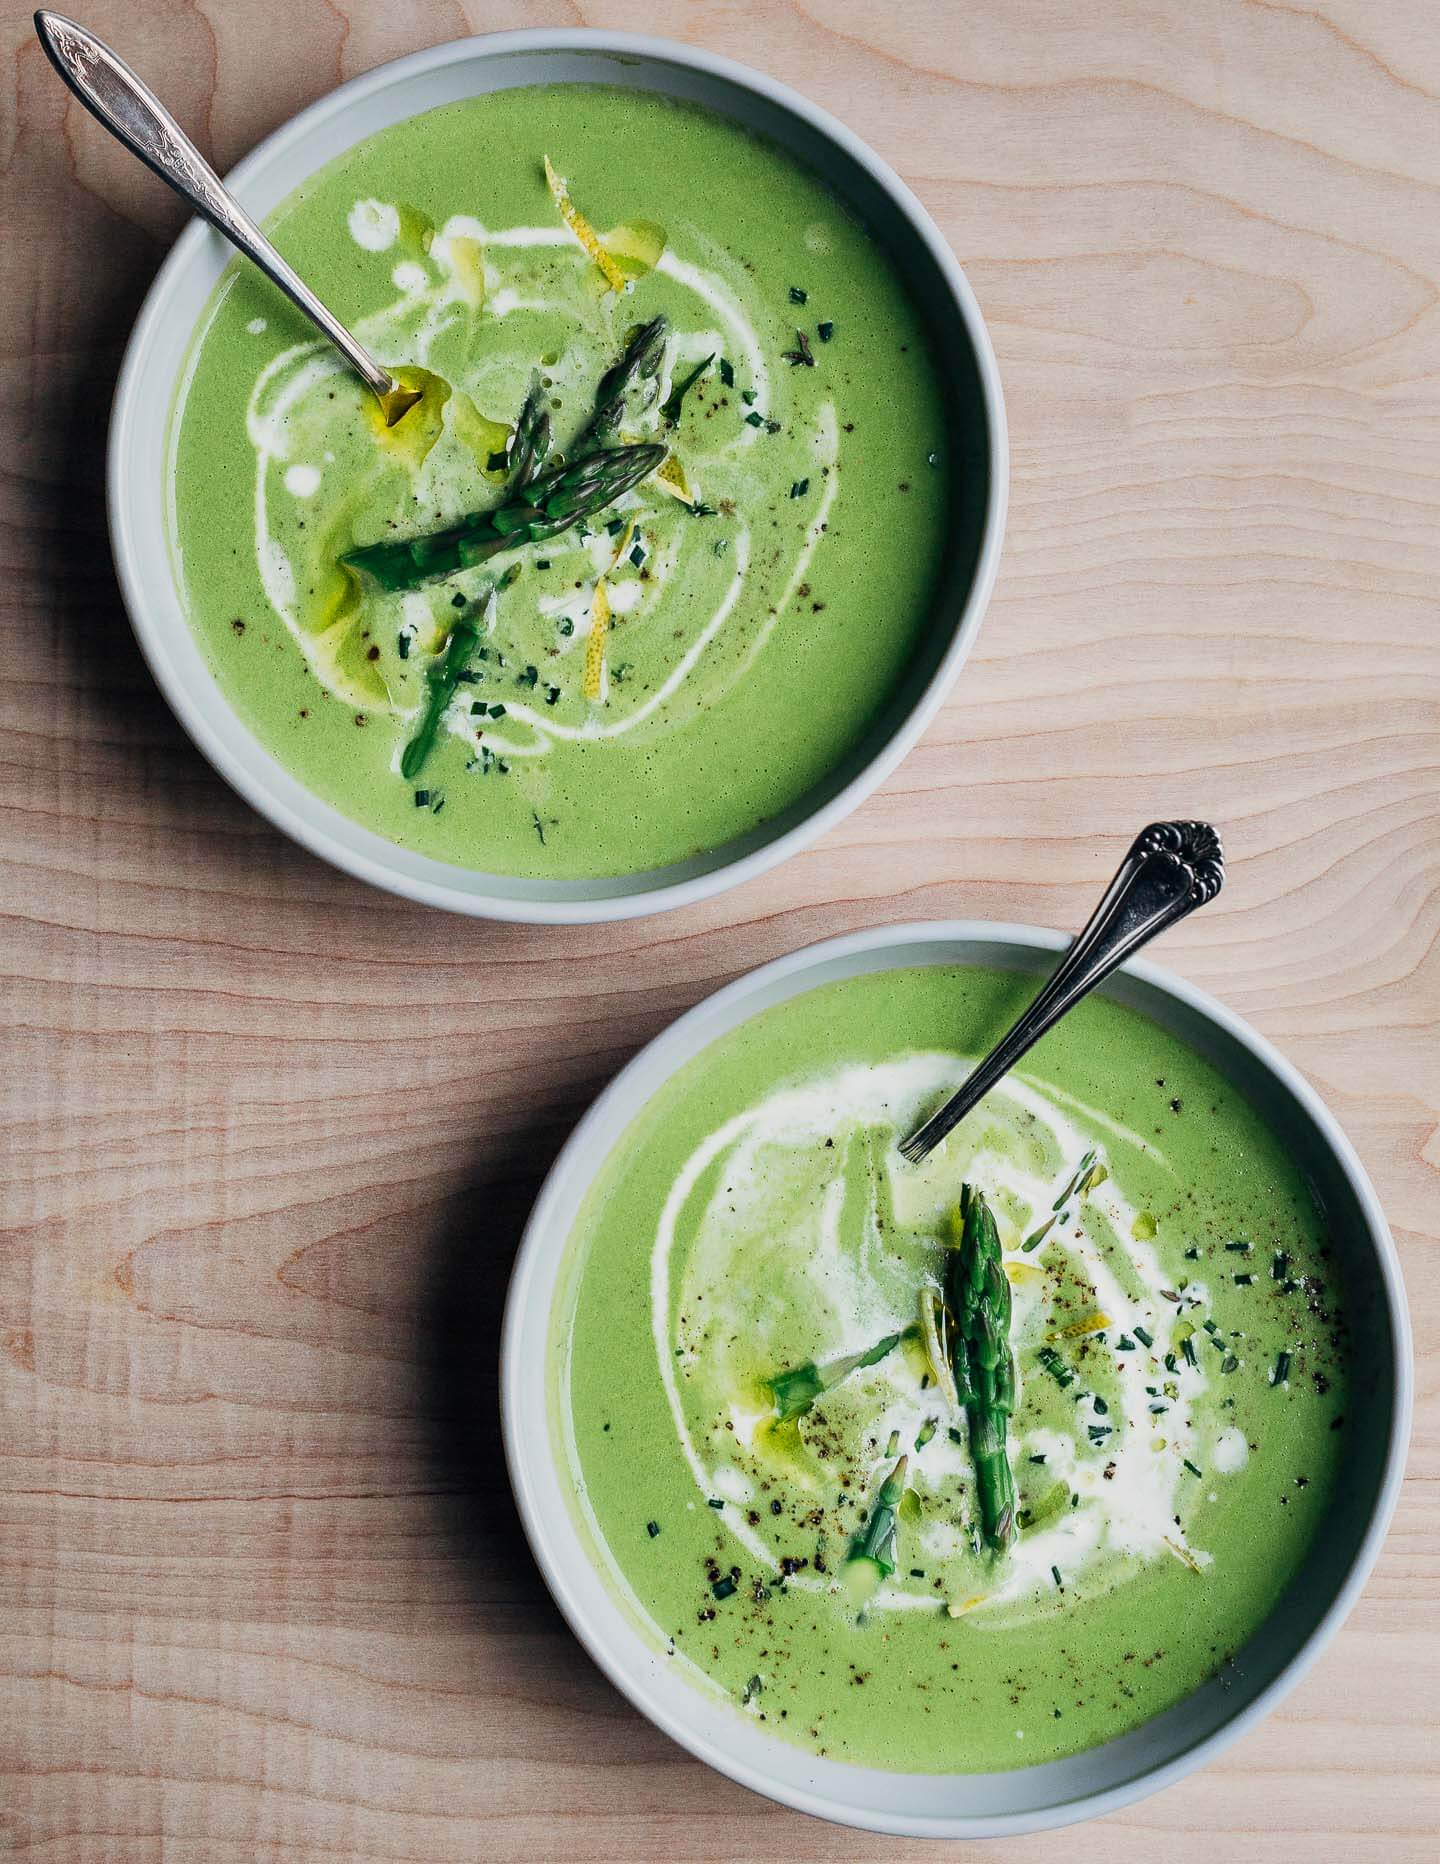 A vibrant, bright green cream of asparagus soup recipe that comes together on the stovetop in about 30 minutes.